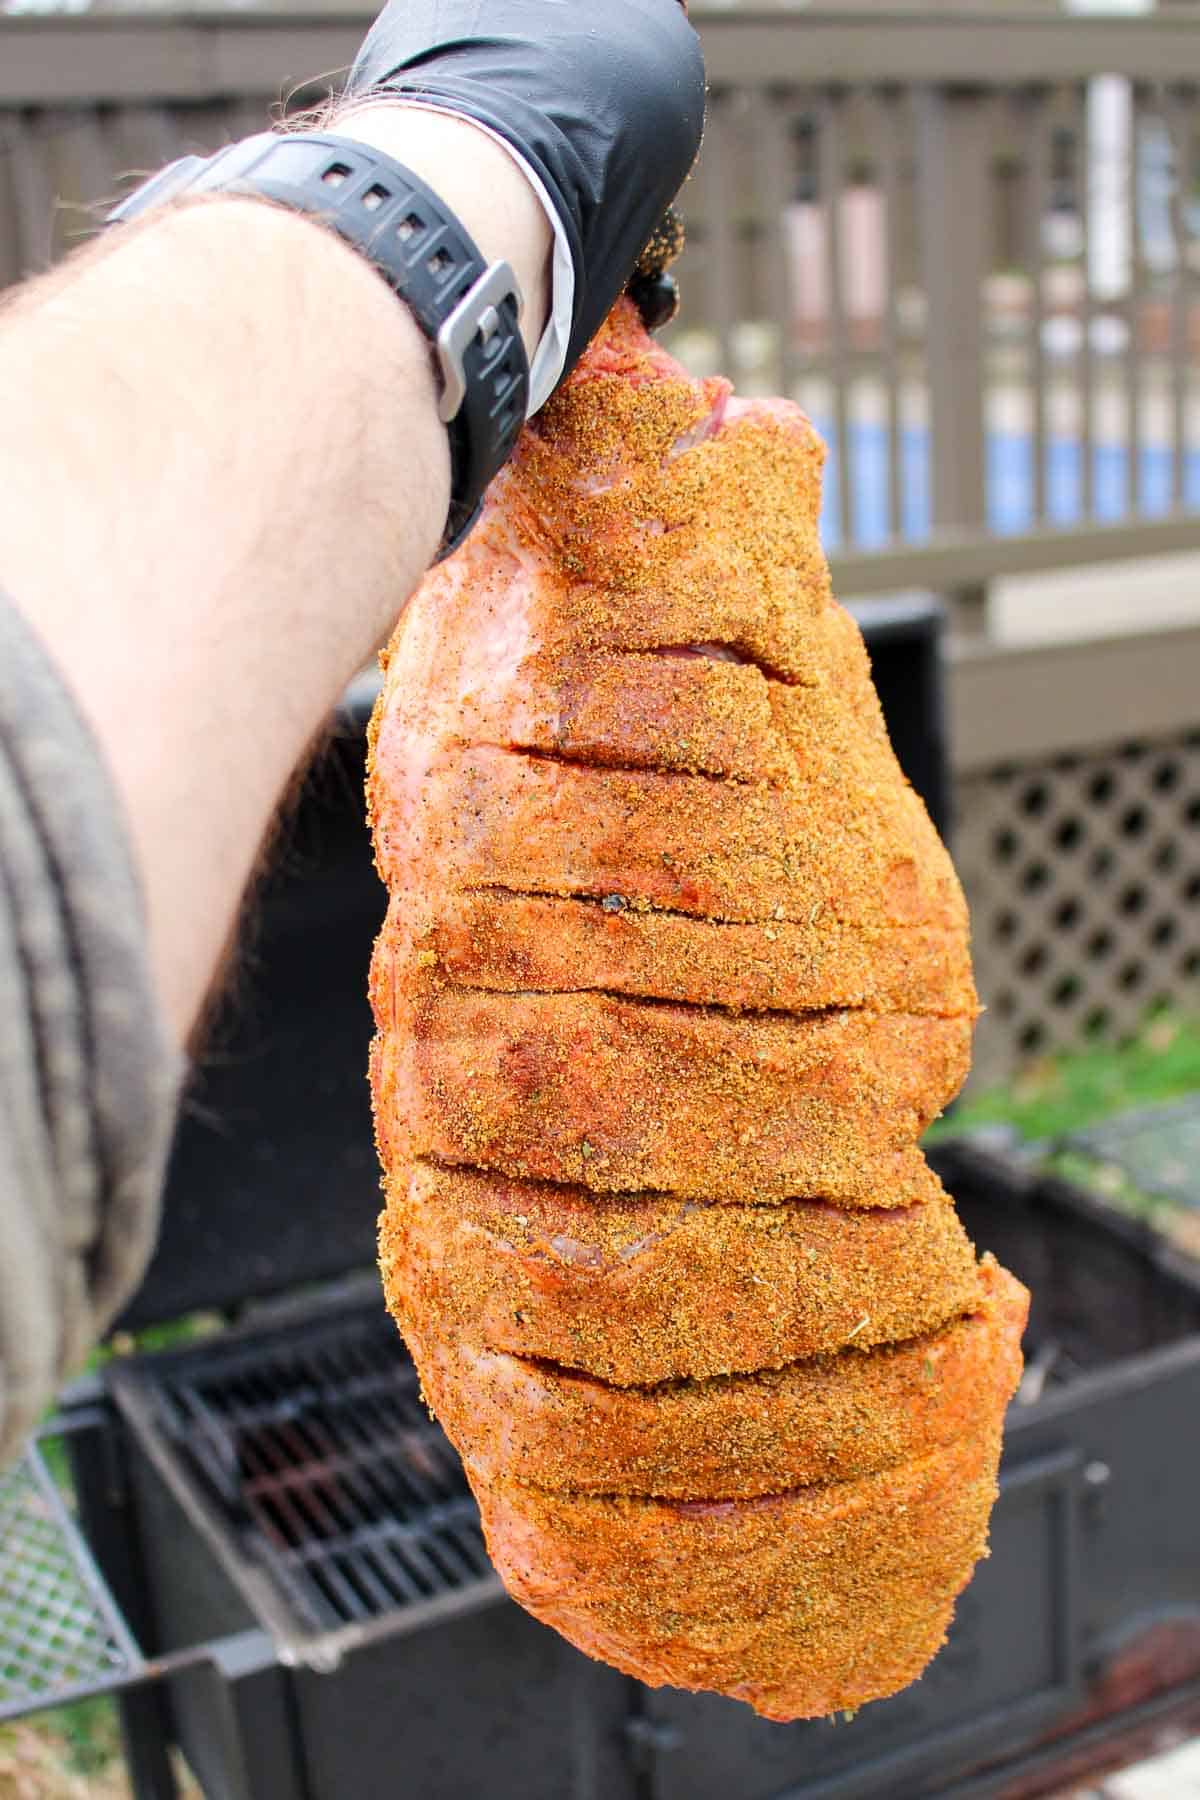 Leg of lamb with our FYR RED Hot Sauce and Chipotle Garlic Rub.